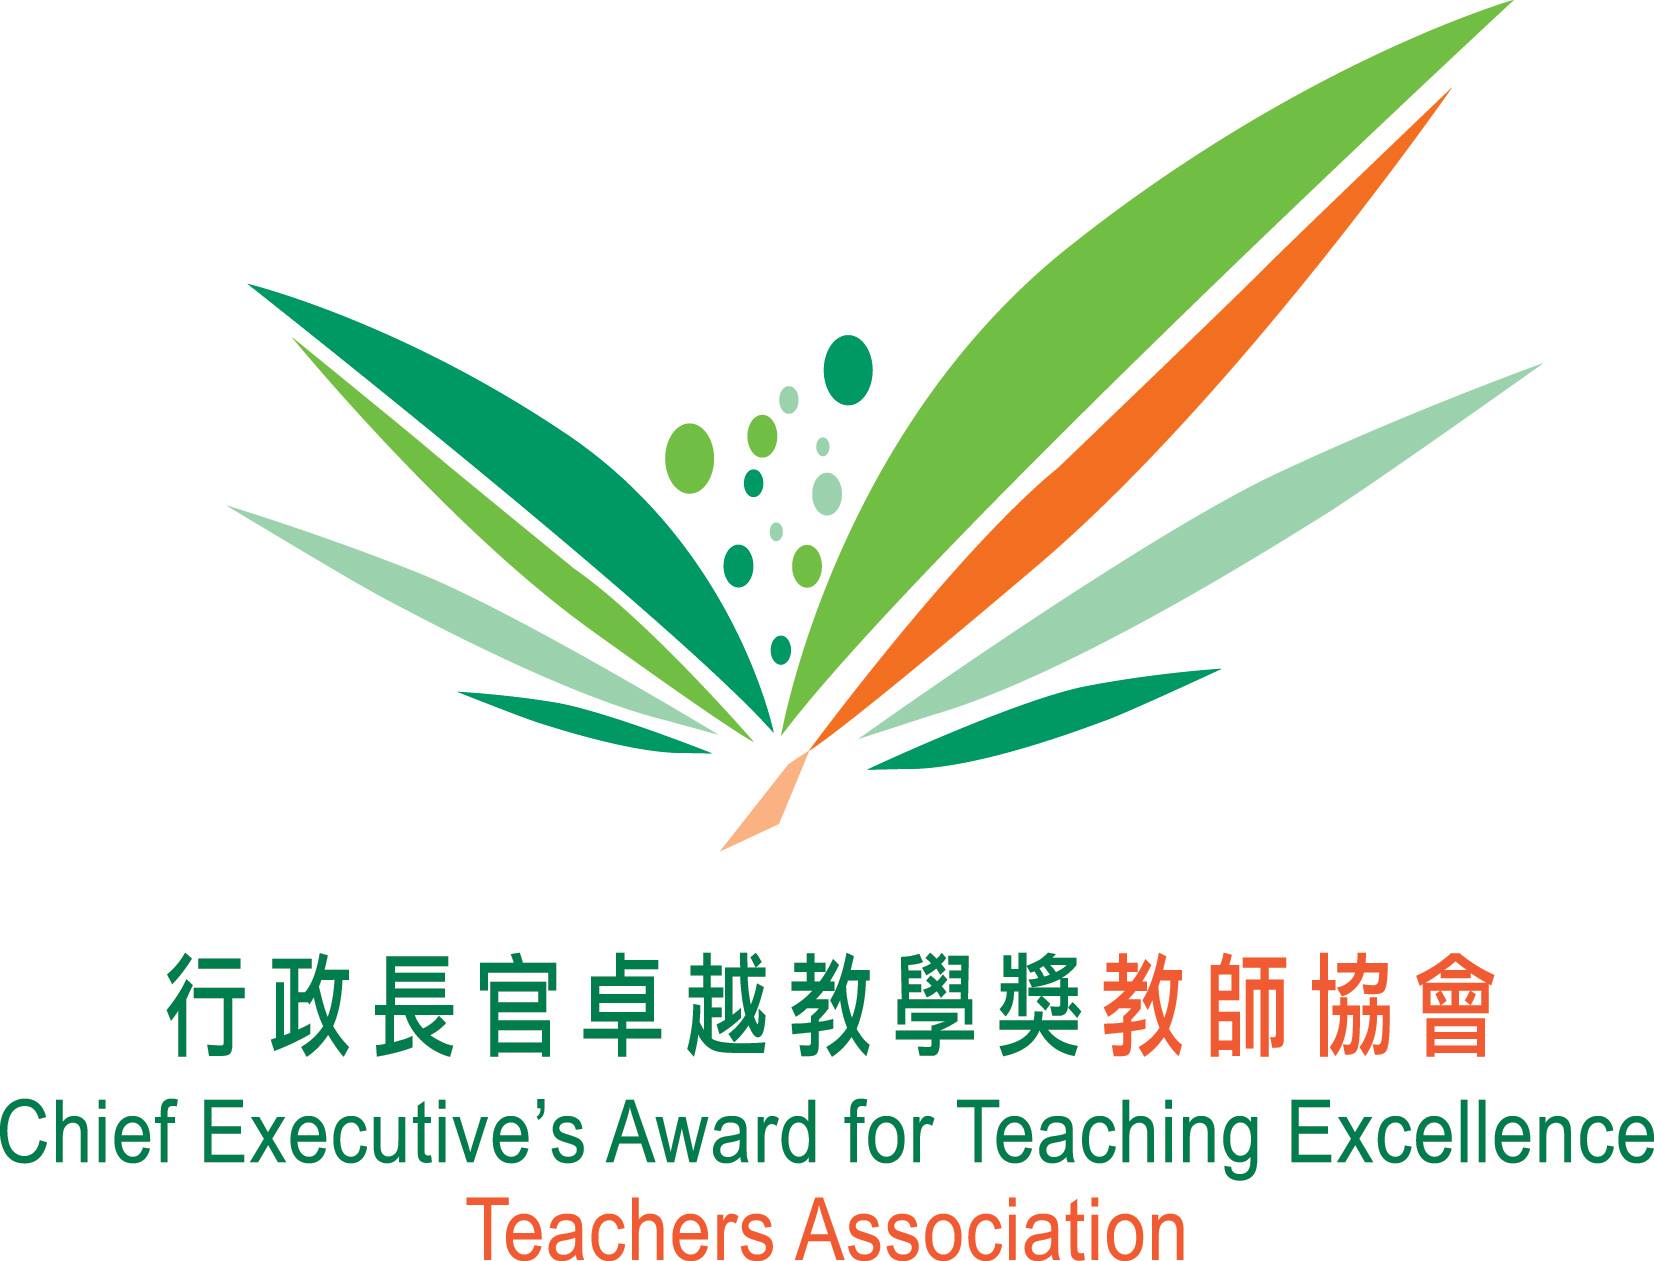 Chief Executive's Awards for Teaching Excellence 2015/2016 